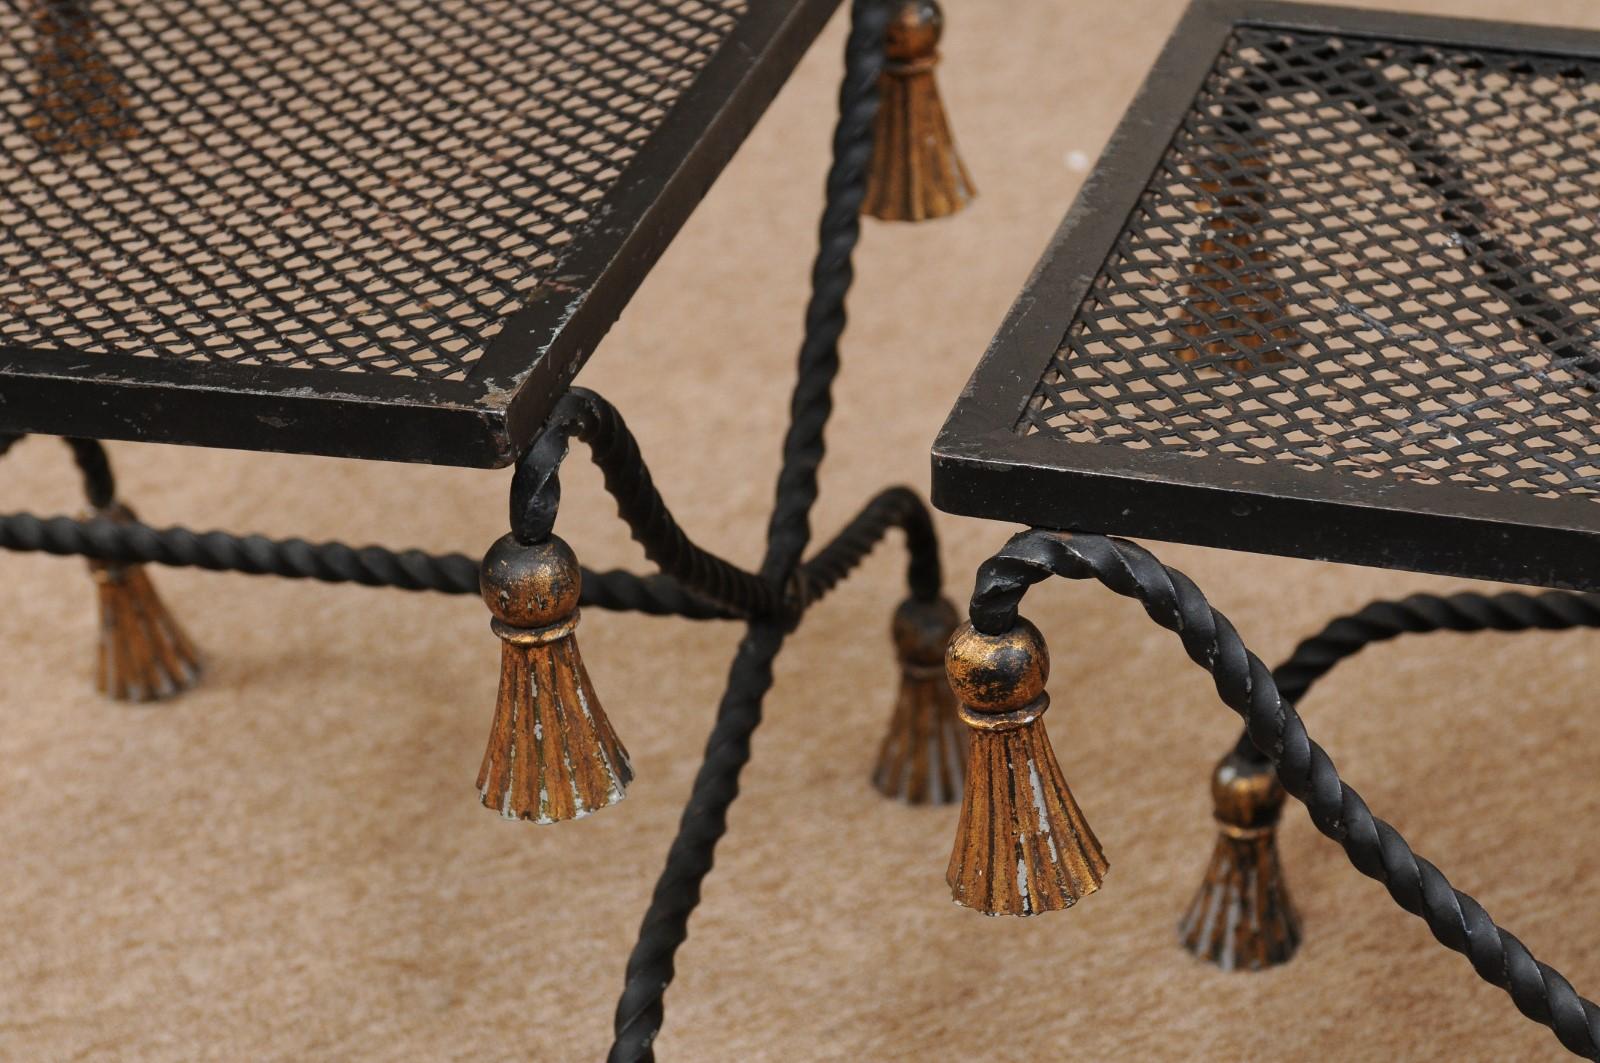 Pair of Vintage Black Painted & Gilt Iron Benches with Tassels, 20th Century For Sale 2